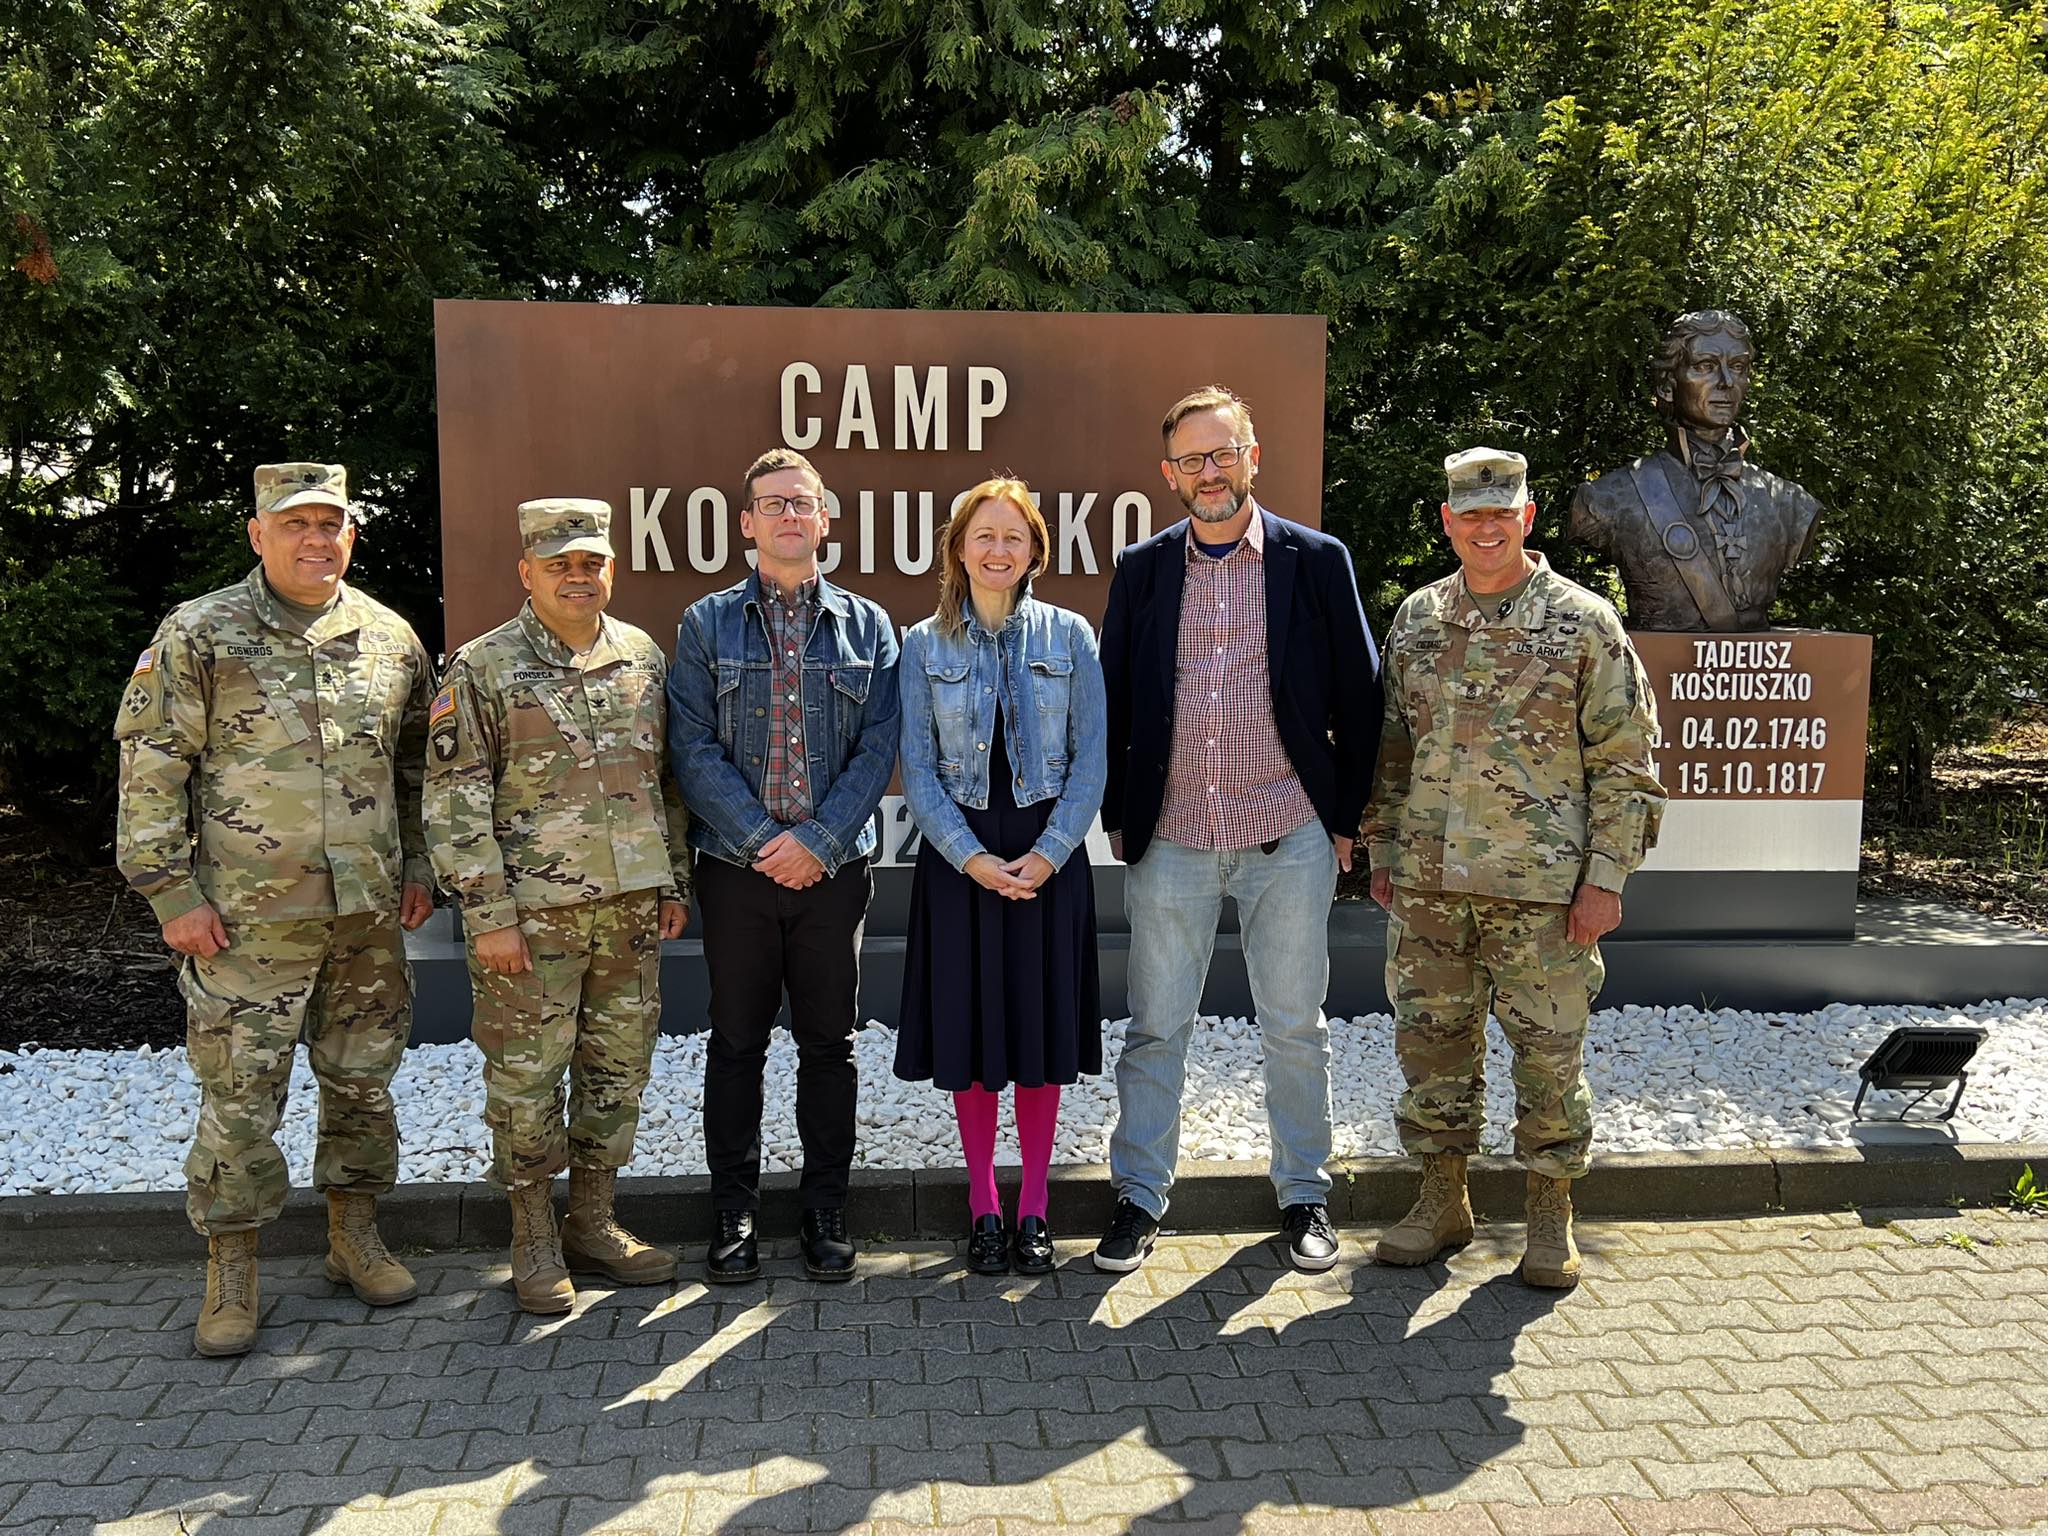 Representatives of the Faculty of English with US Army officers